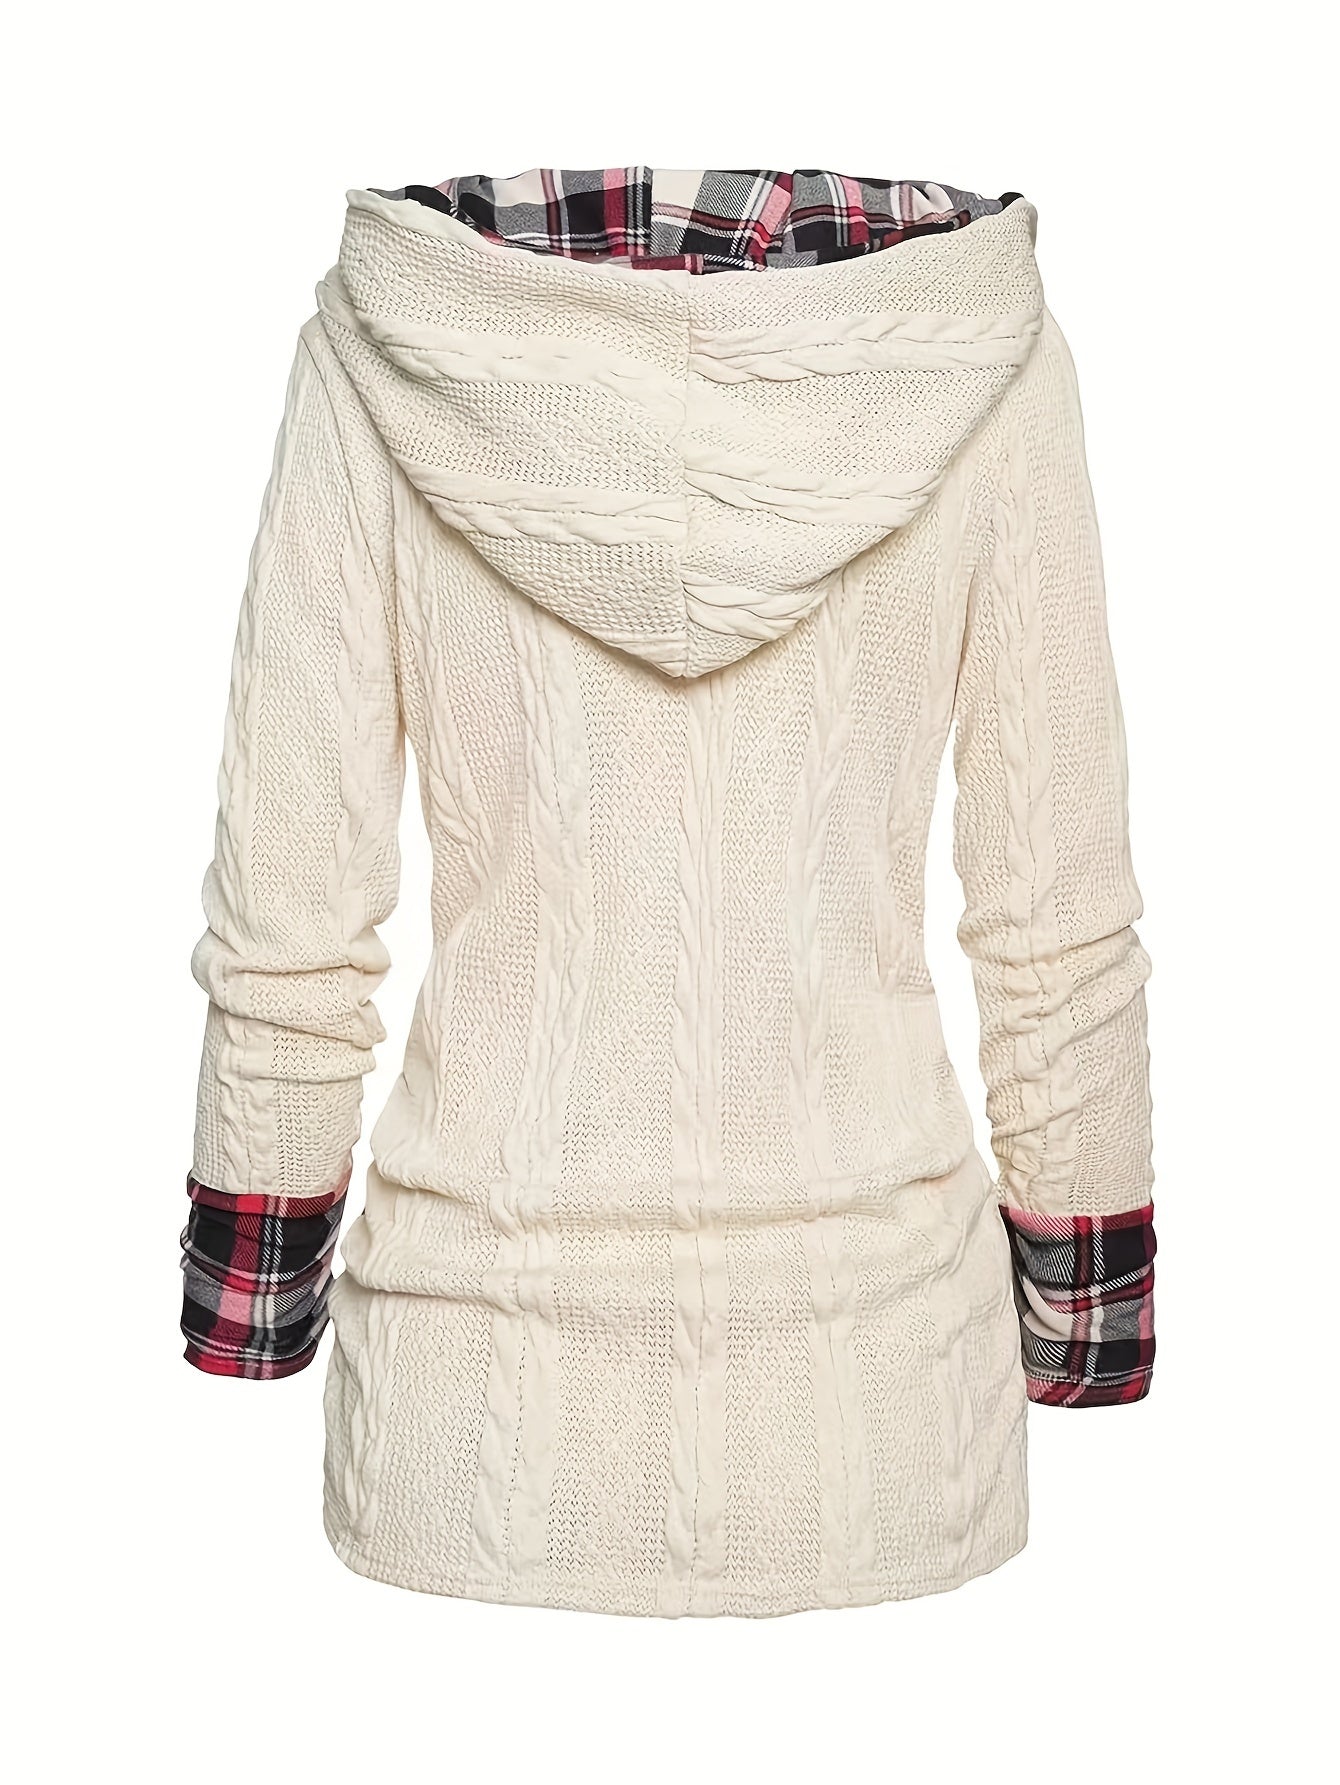 Back view of a Maramalive™ Plus Size Casual Top, Women's Plus Colorblock Plaid Print Cable Button Decor Long Sleeve Hoodie with folded plaid cuffs, a gingham-patterned hood lining, and casual style.